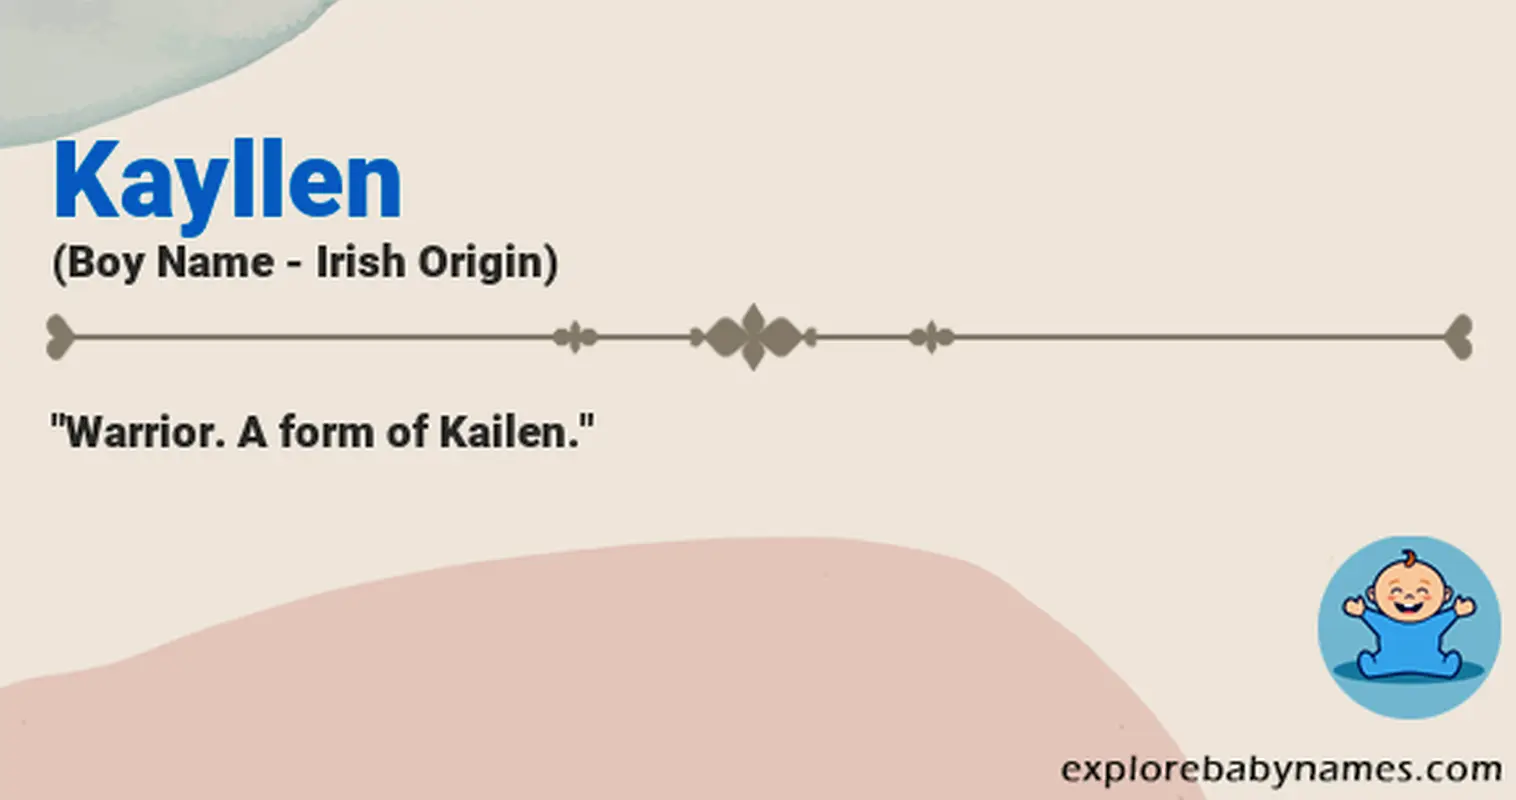 Meaning of Kayllen